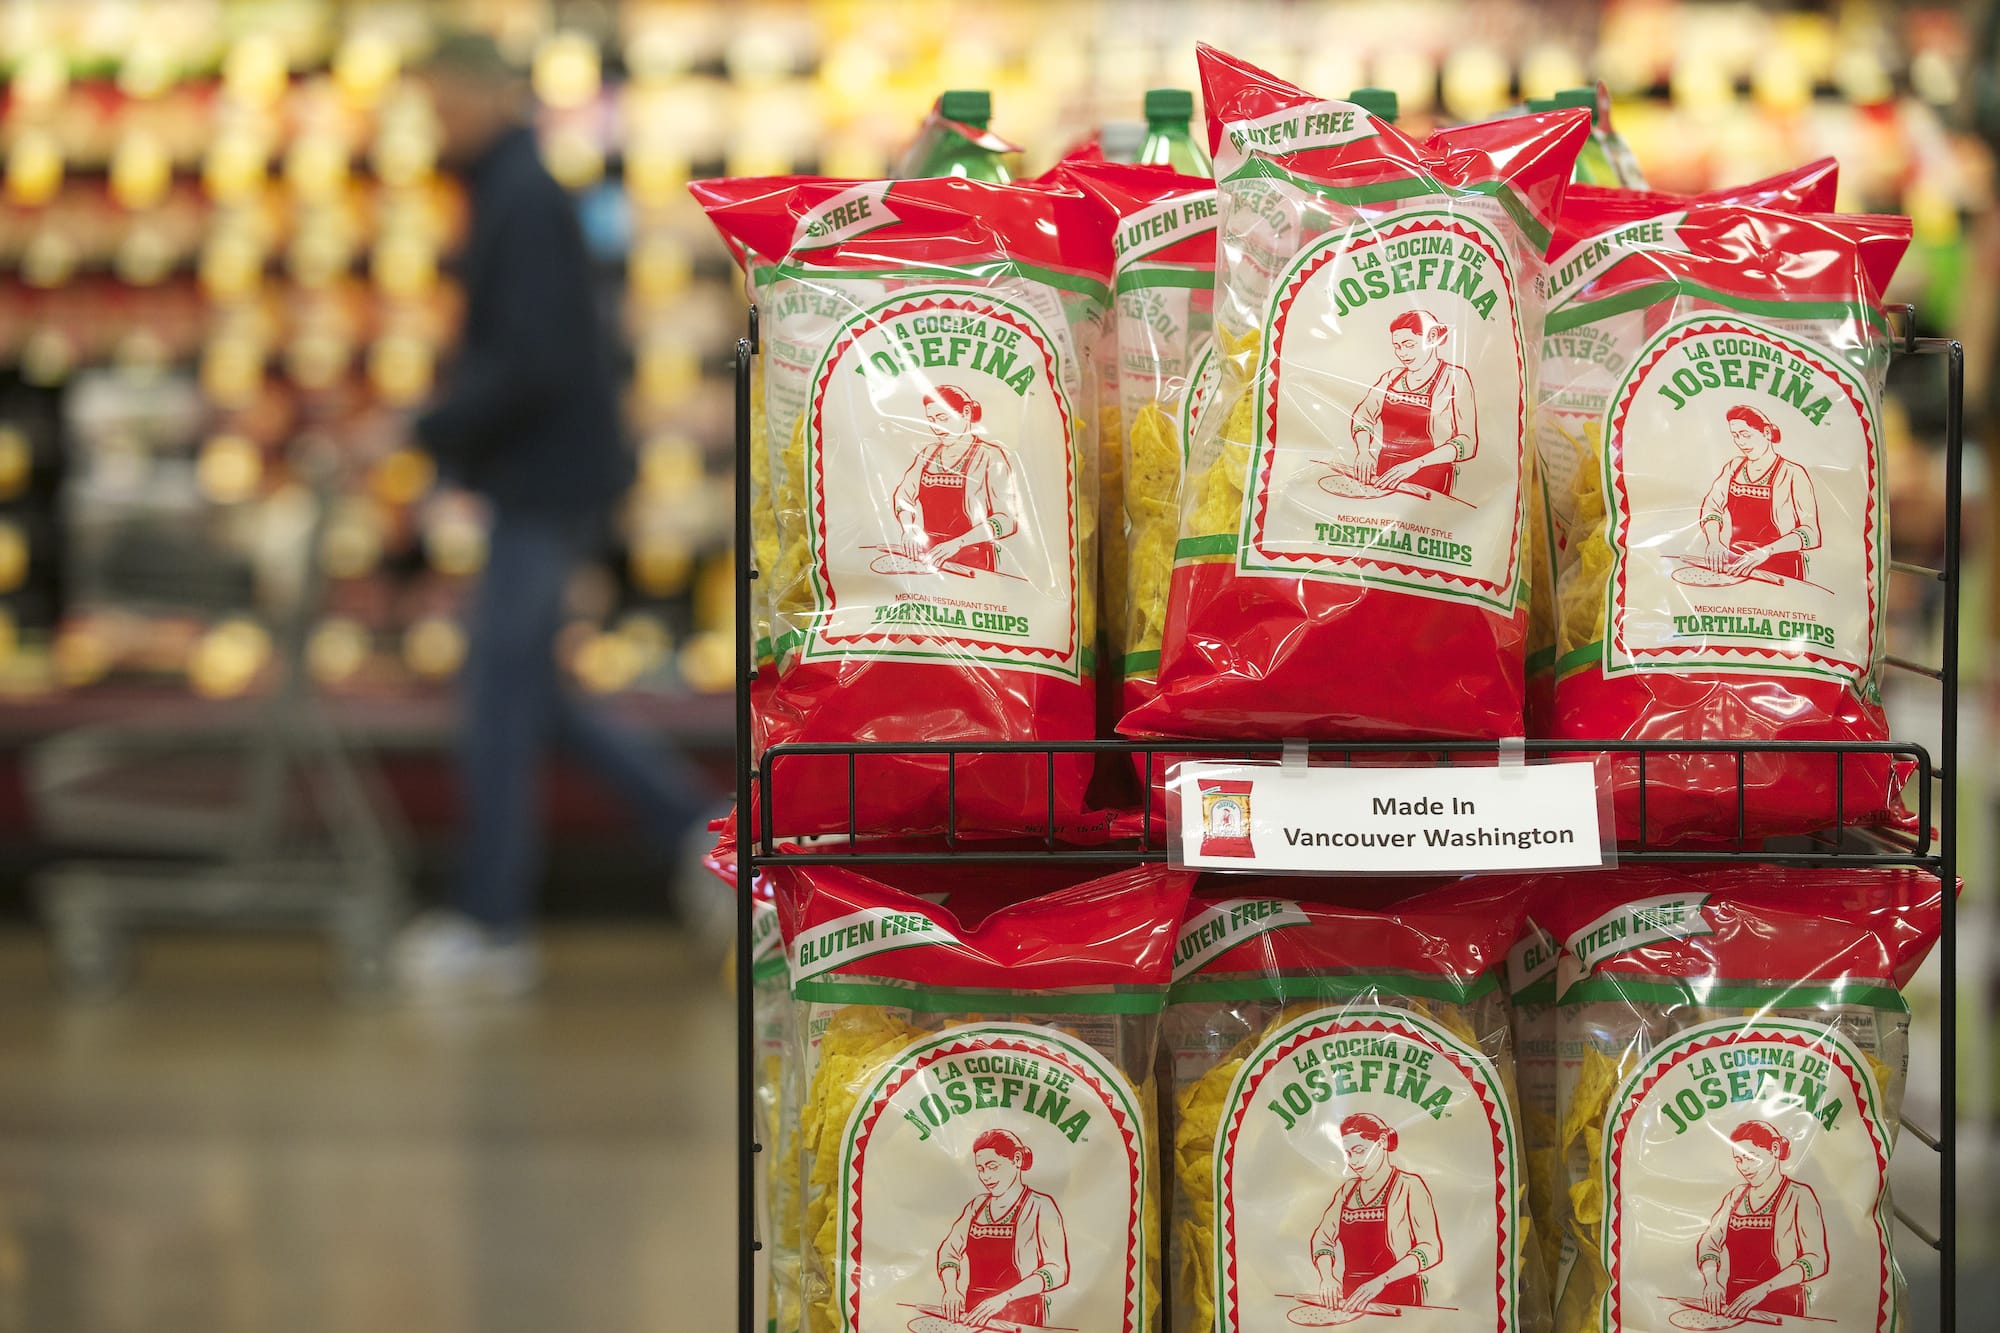 Josefina brand tortilla chips are displayed Monday at a store in Vancouver. A new tortilla chip product, Josefina is being sold as a competitor to Juanita's tortilla chips, made by a Hood River company.